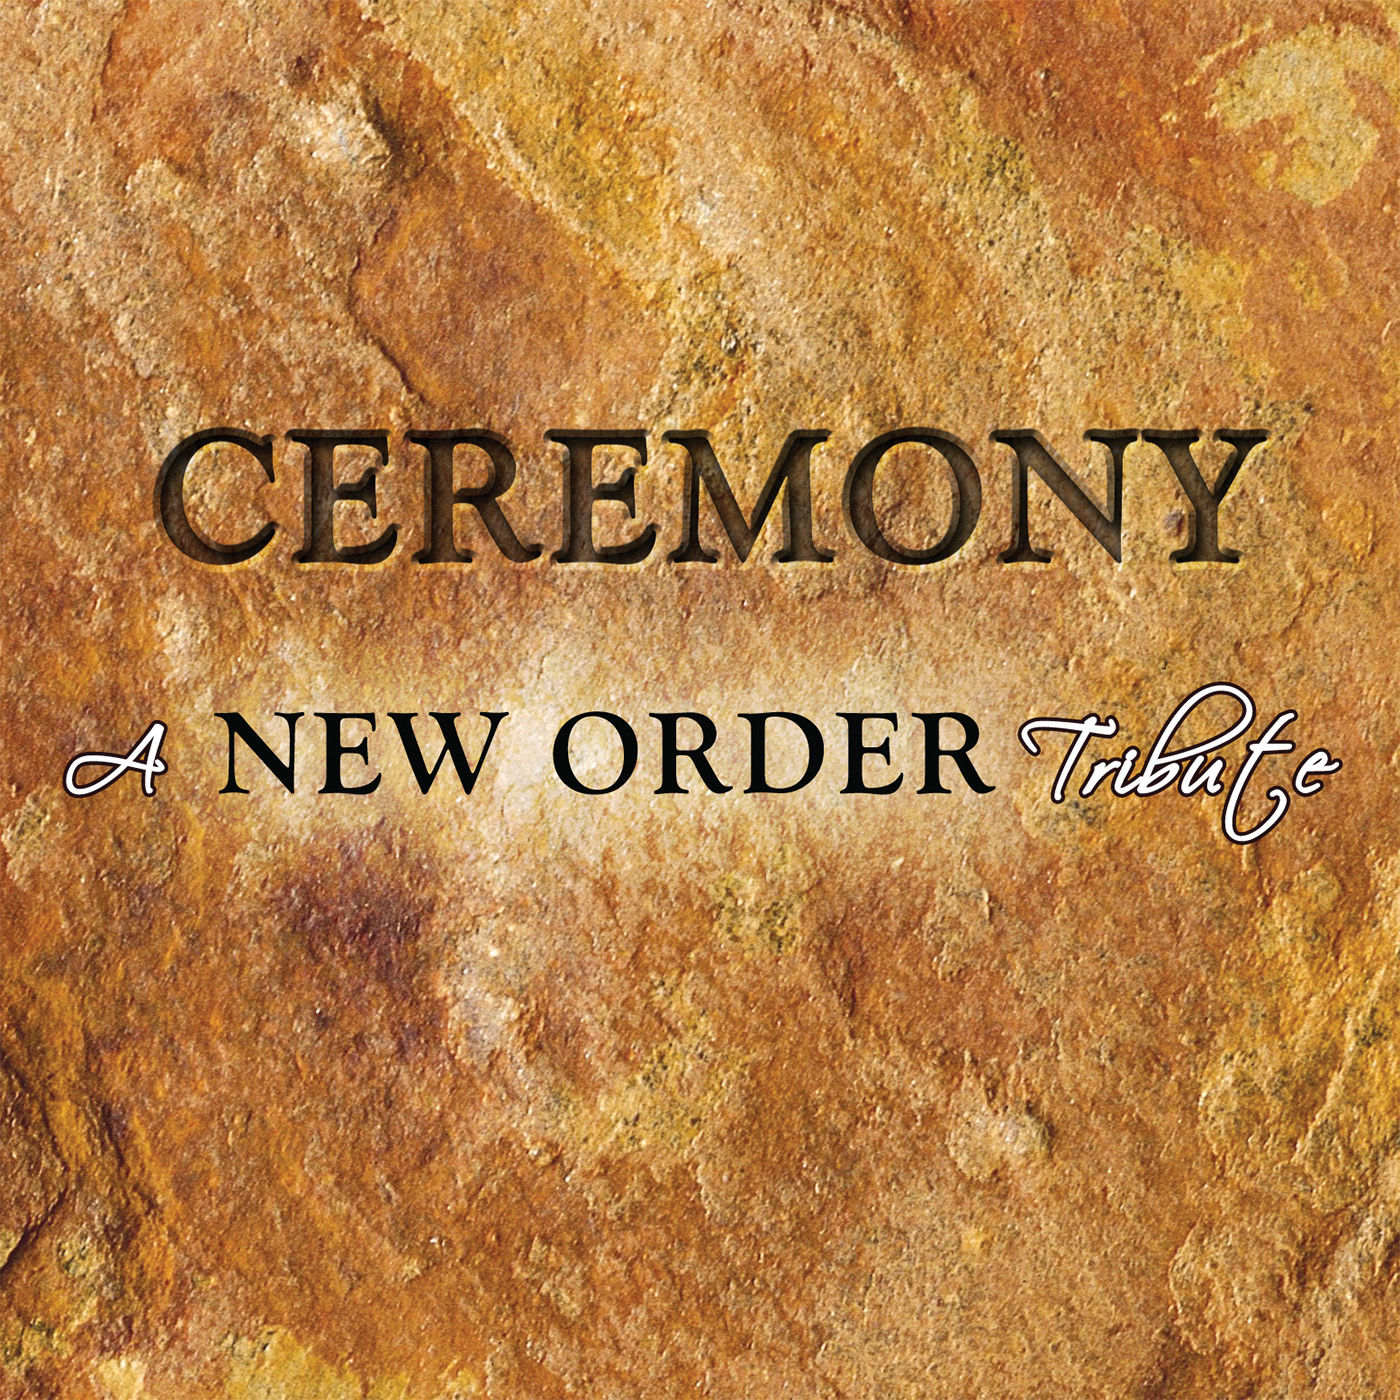 Contest: Win a copy of ‘Ceremony: A New Order Tribute’ 2CD benefit compilation